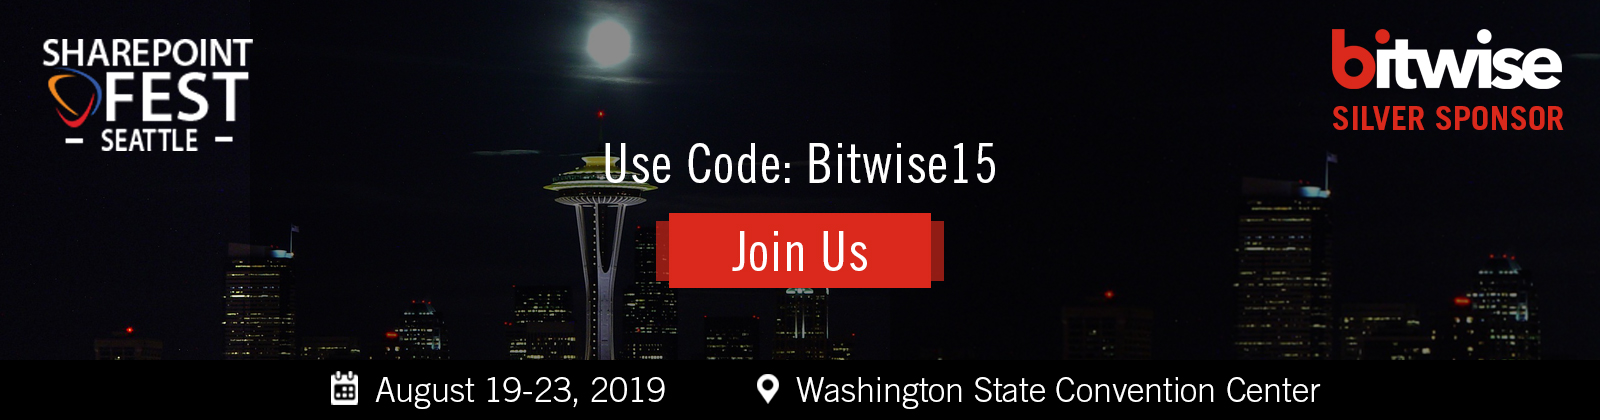 Bitwise us SharePoint Fest Seattle